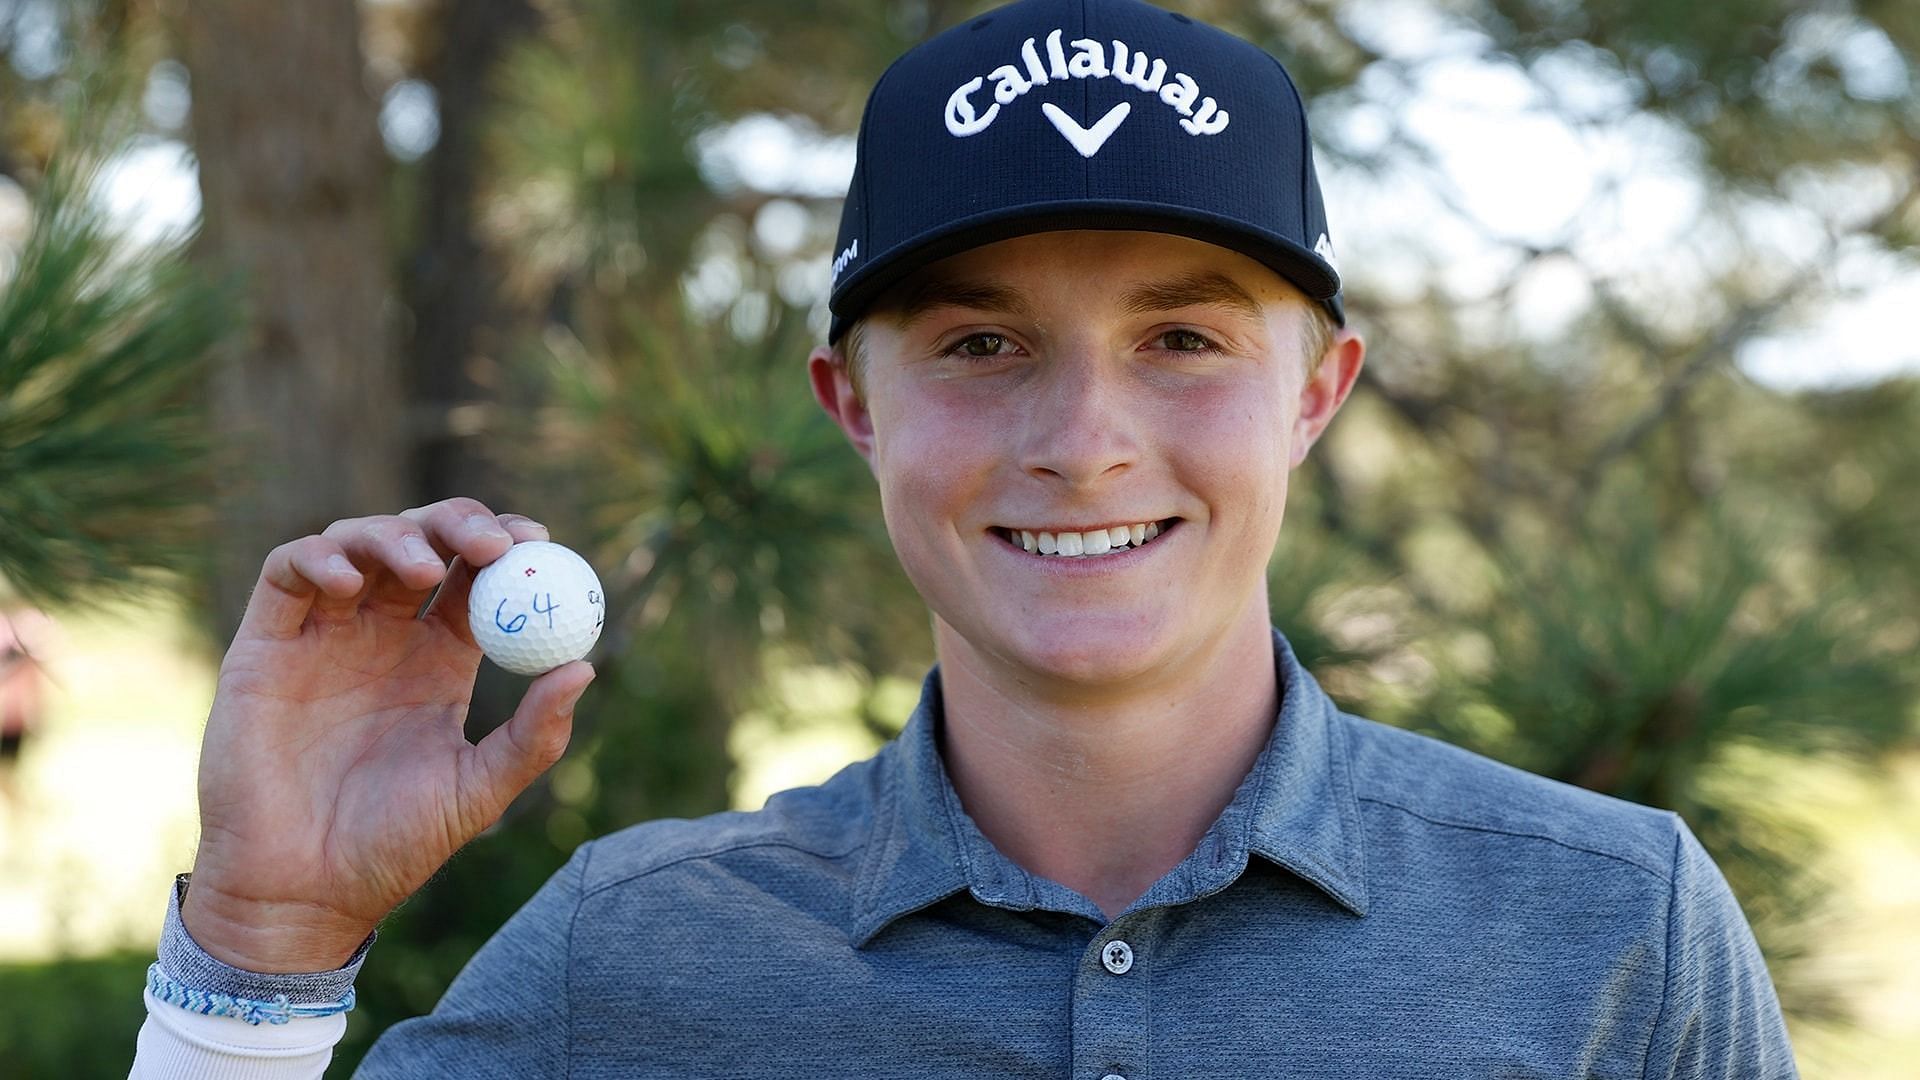 Blades Brown becomes the youngest co-medalist at US Amateur Championship(Image via Golf Channel)